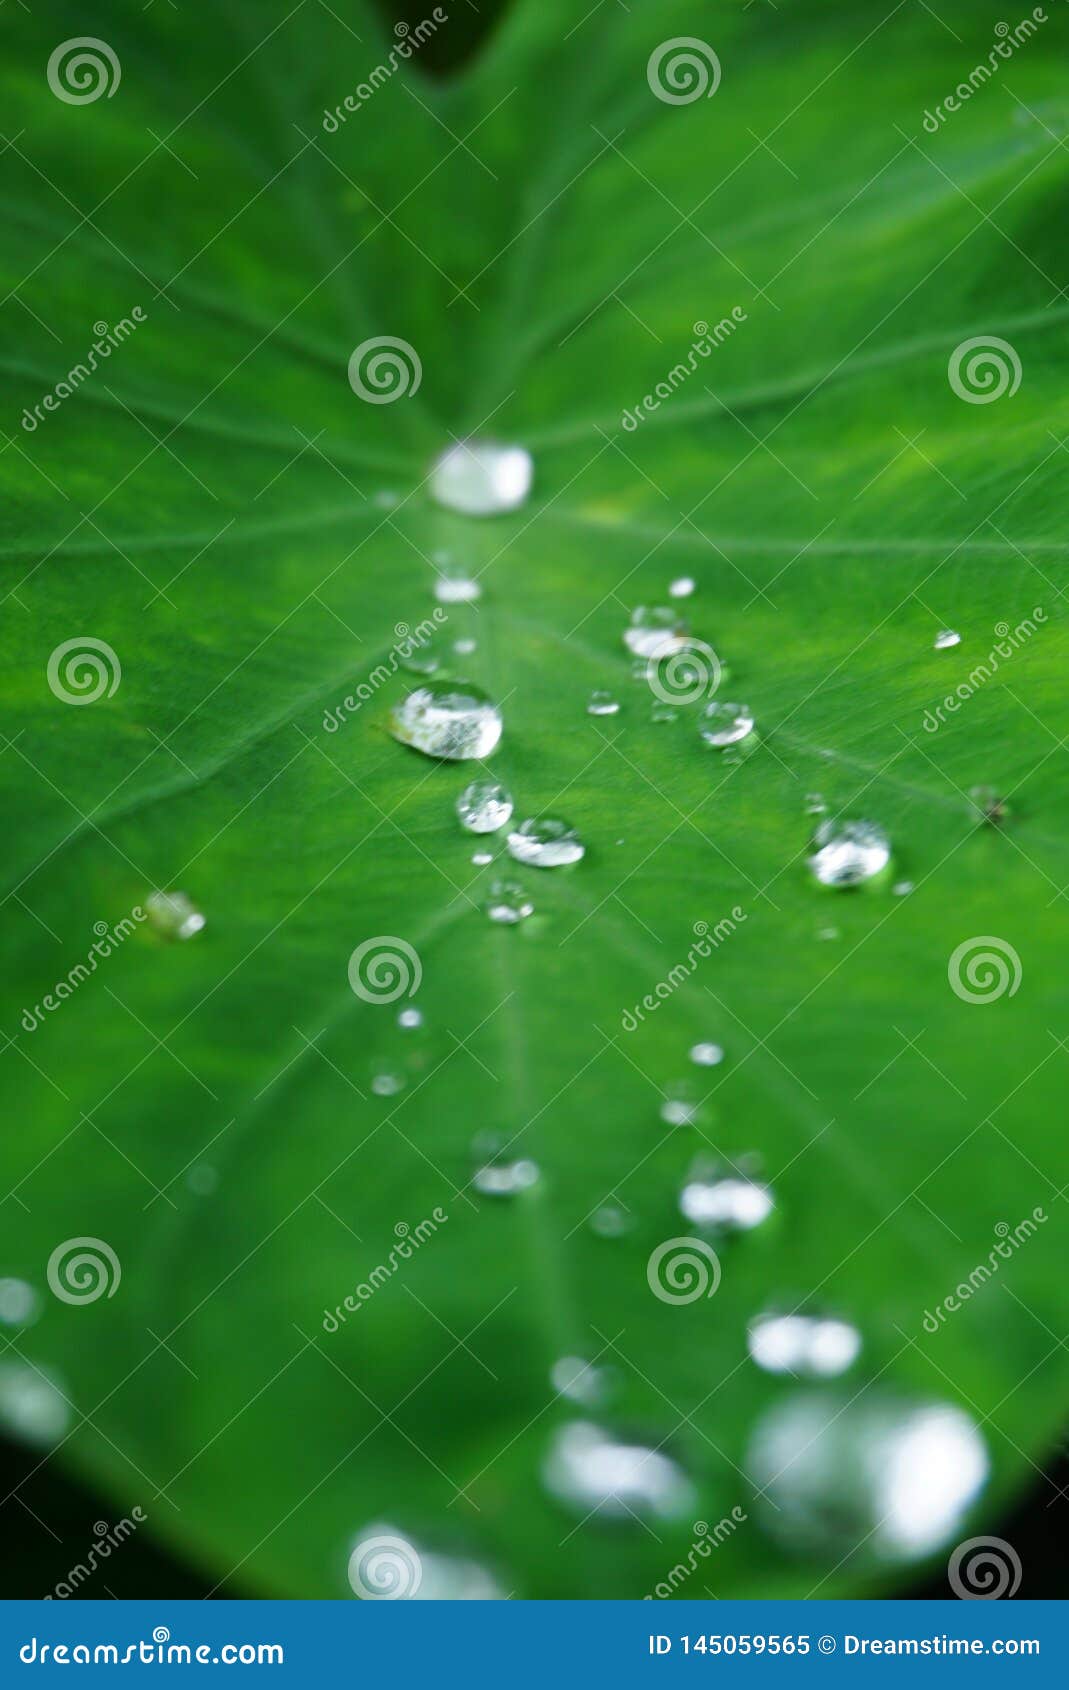 macro photo of water drops on a leaf